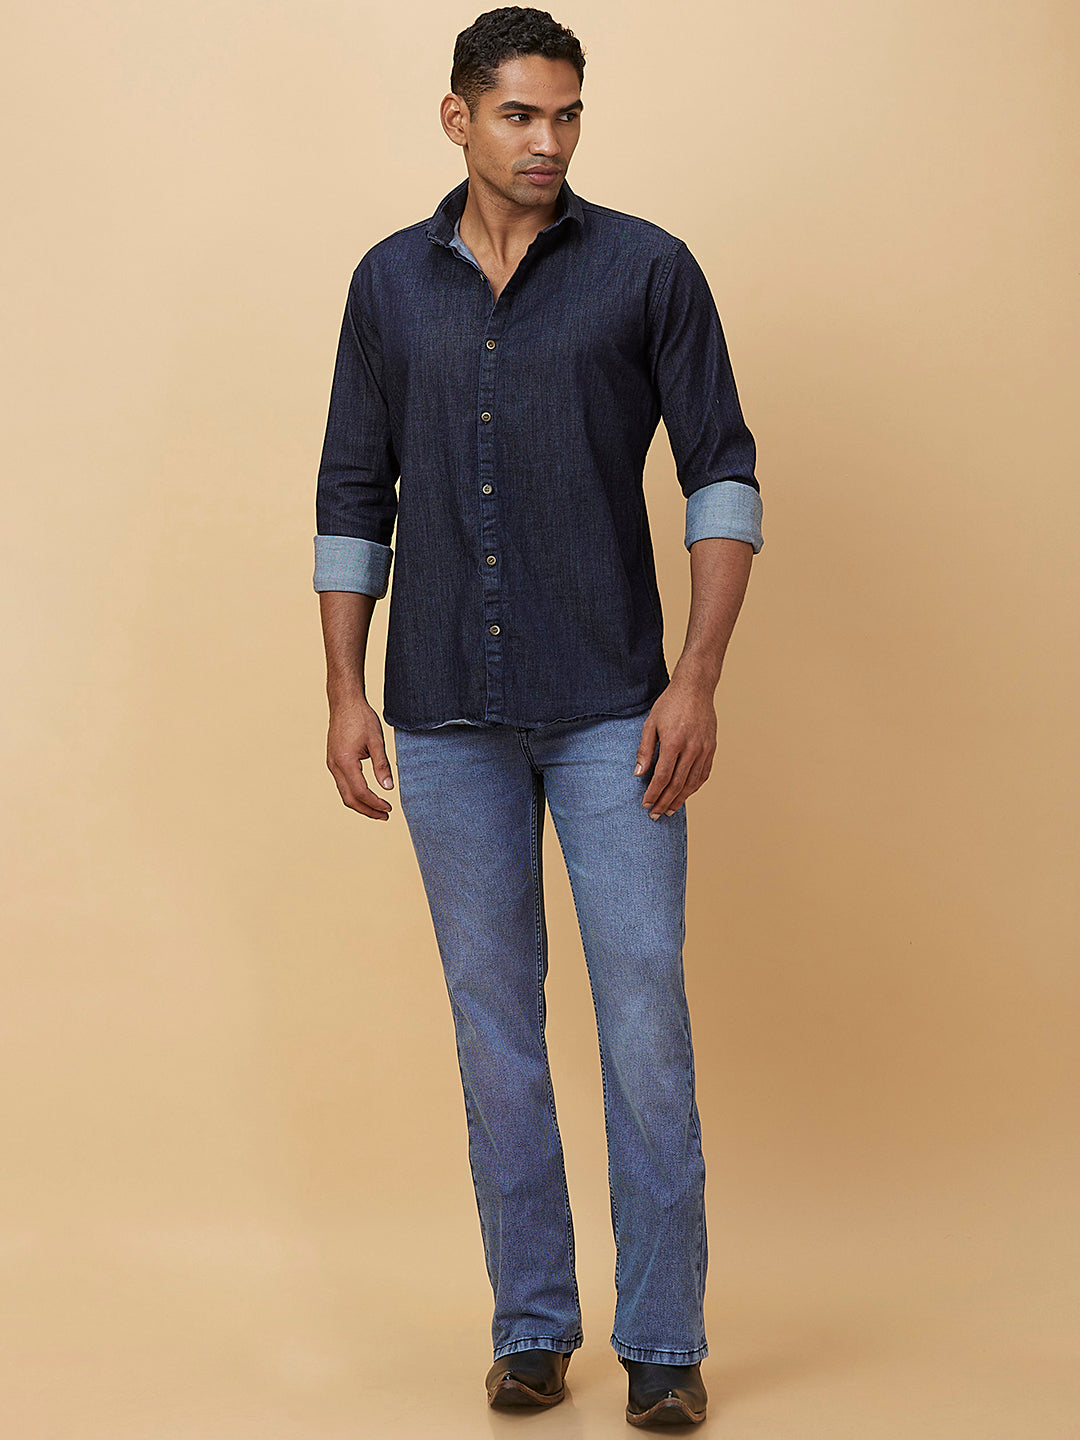 Stone Wash Blue Boot-cut Jeans with Fade